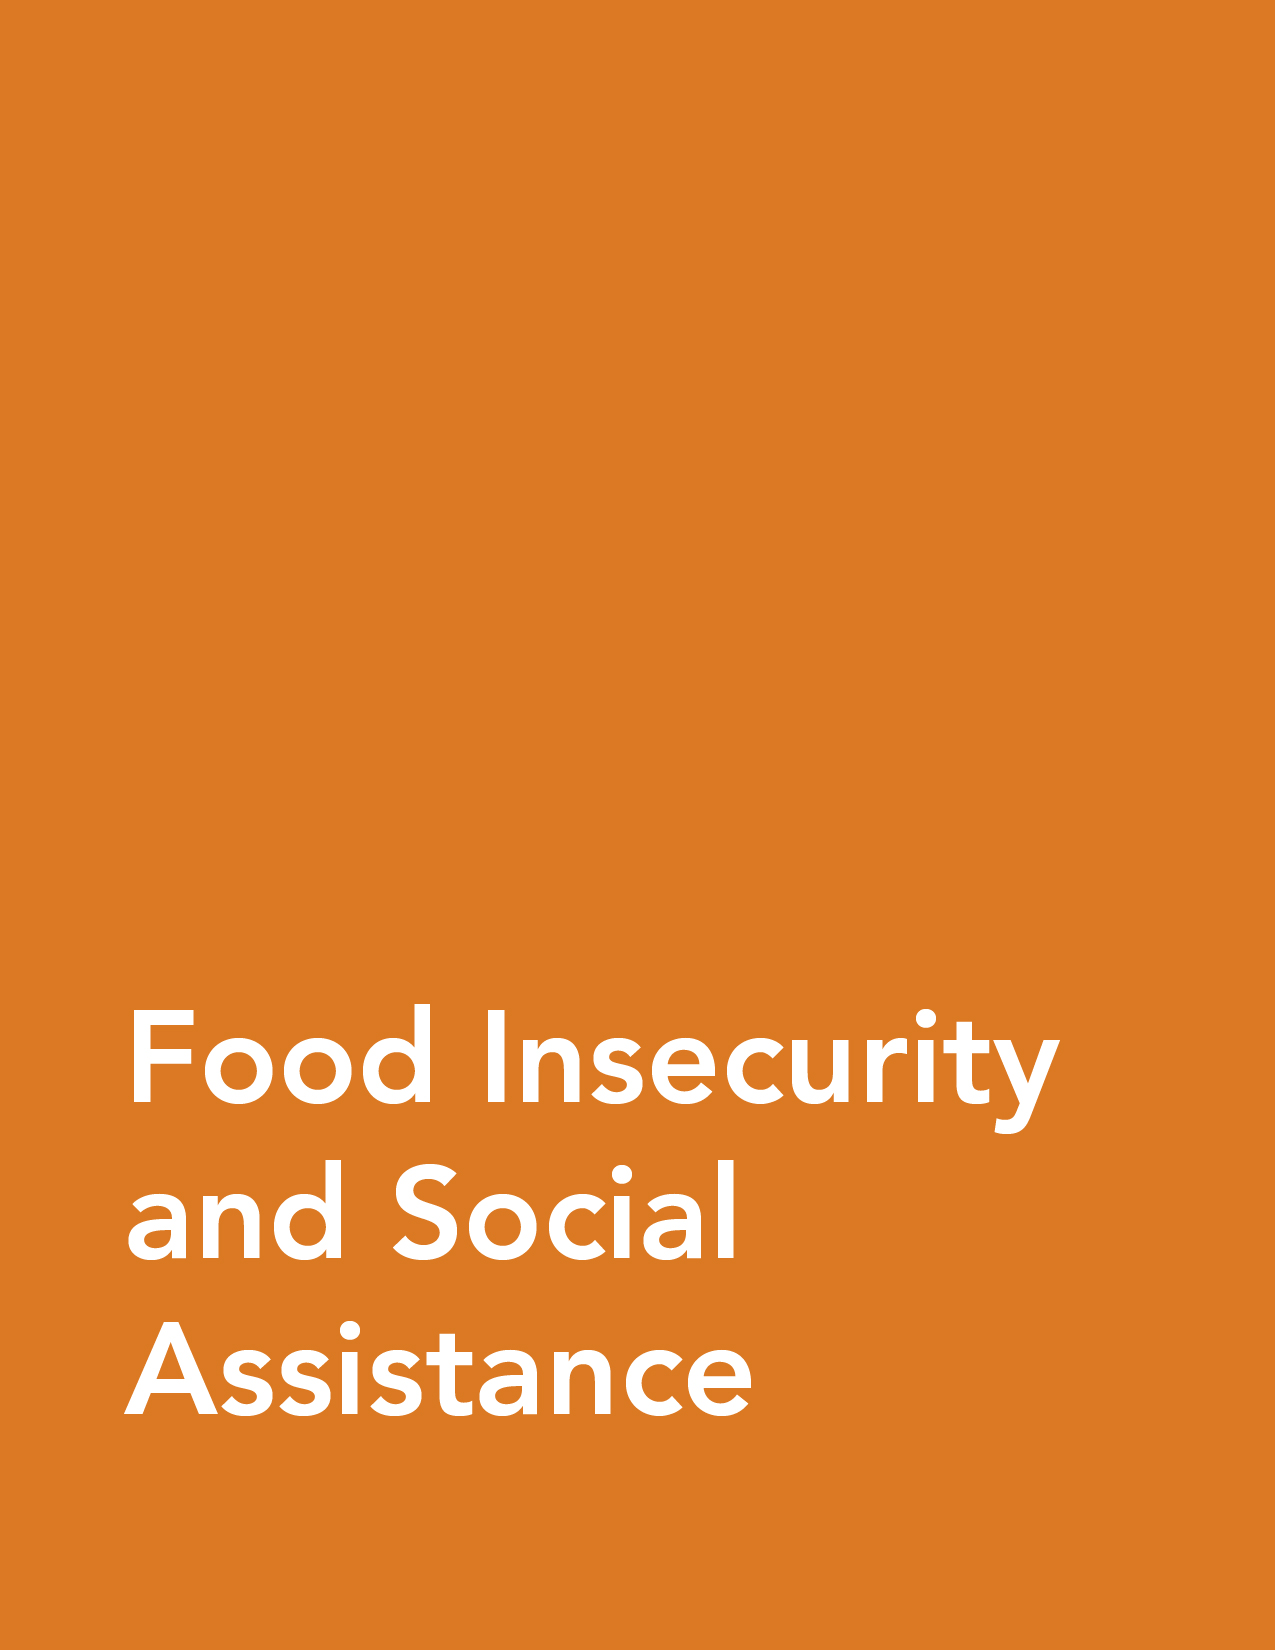 Food Insecurity and Social Assistance